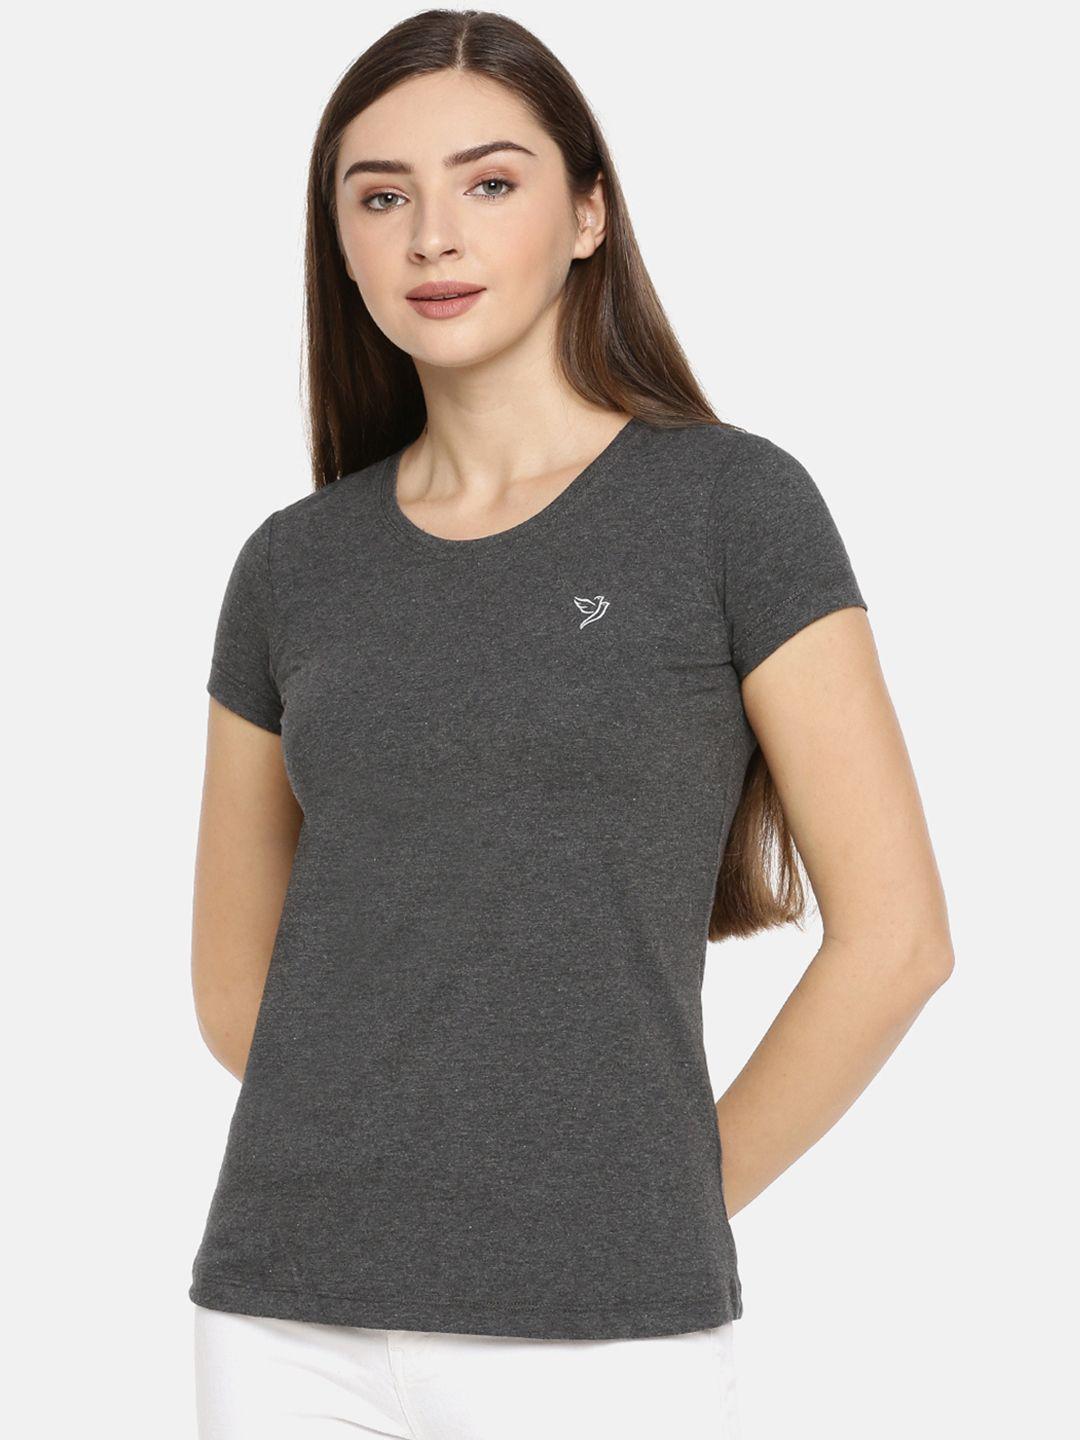 twin birds women charcoal grey slim fit solid round neck t-shirt